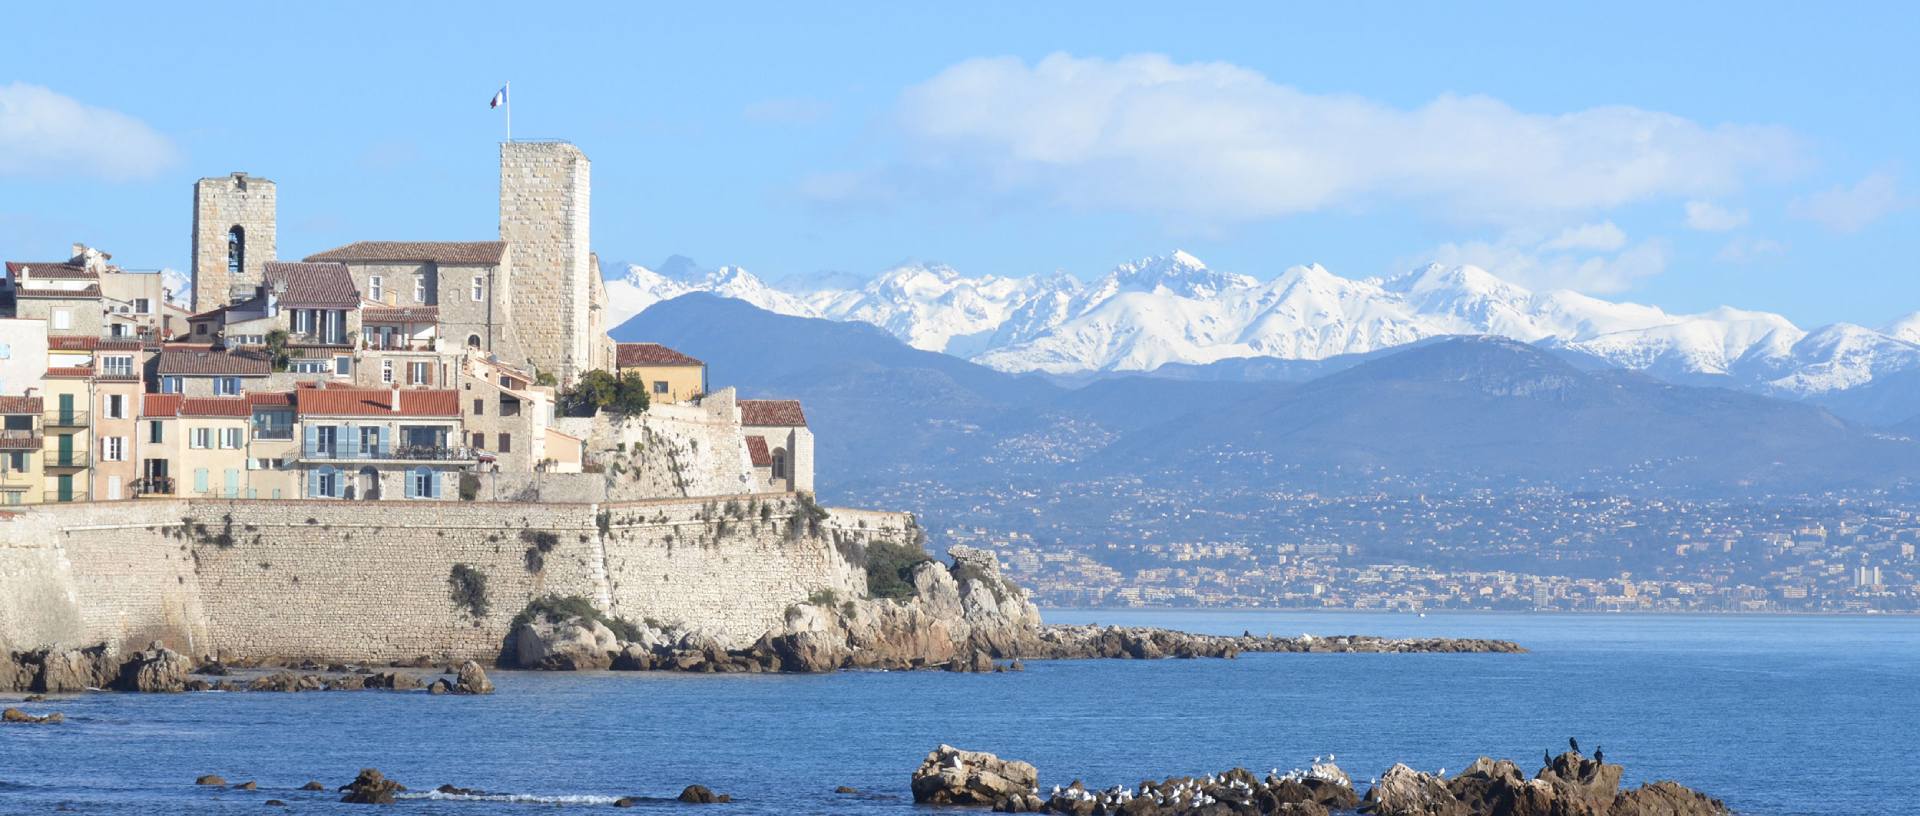 Cabinet expert comptable et audit a Antibes - Cabinet Durivaux Antibes